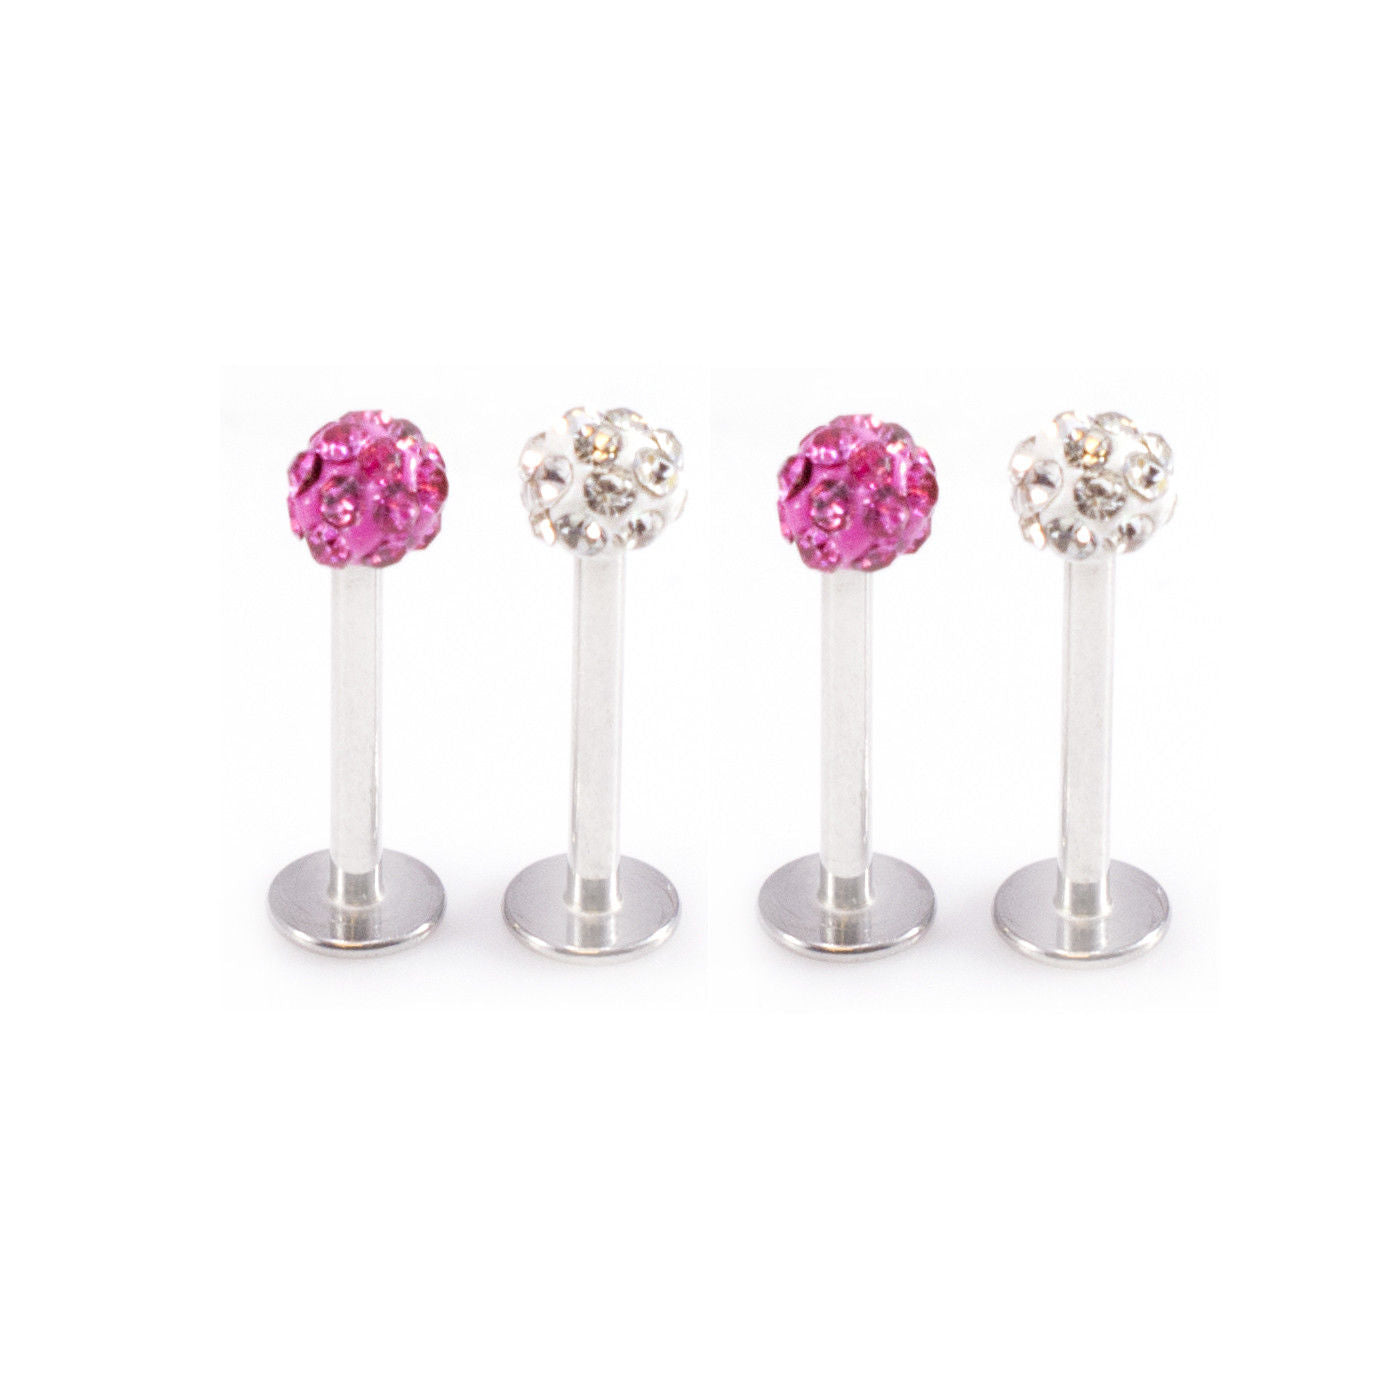 Labret Monroe Set of 4 two Clear Ferido Ball and two pink Ferido Ball 16g